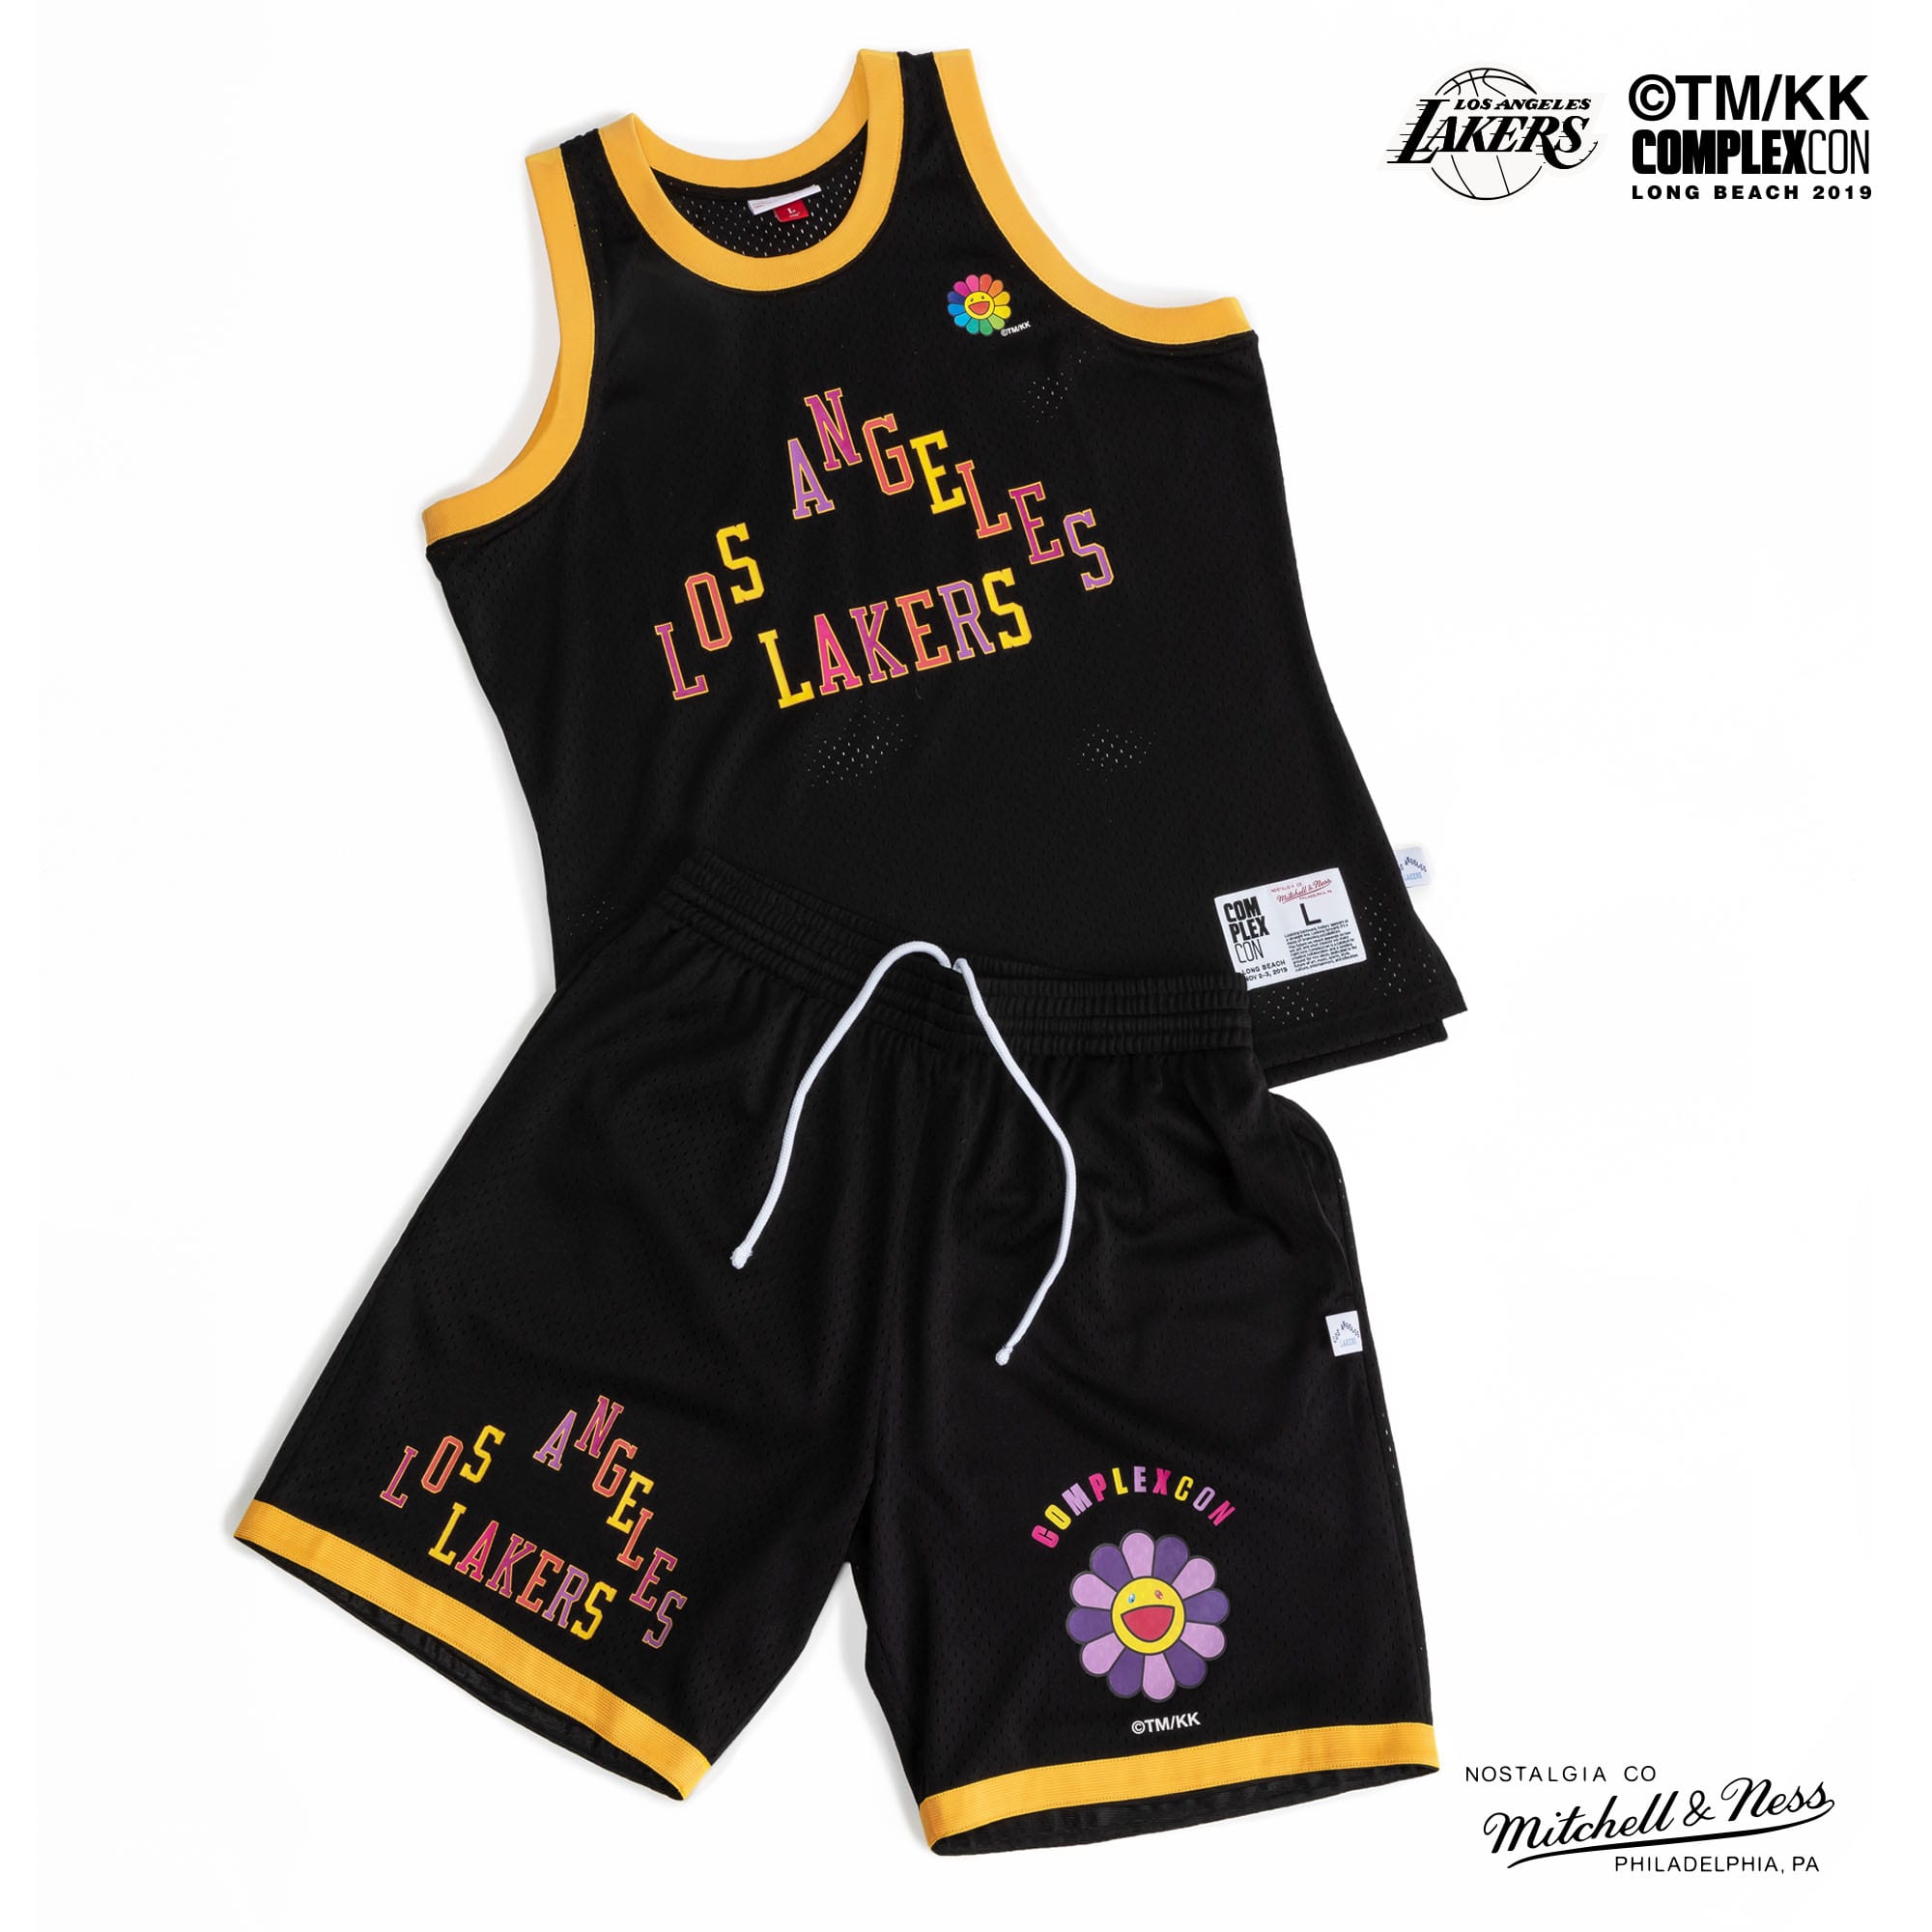 Takashi Murakami Designs Los Angeles Lakers Merch For Complexcon Long Beach Complex